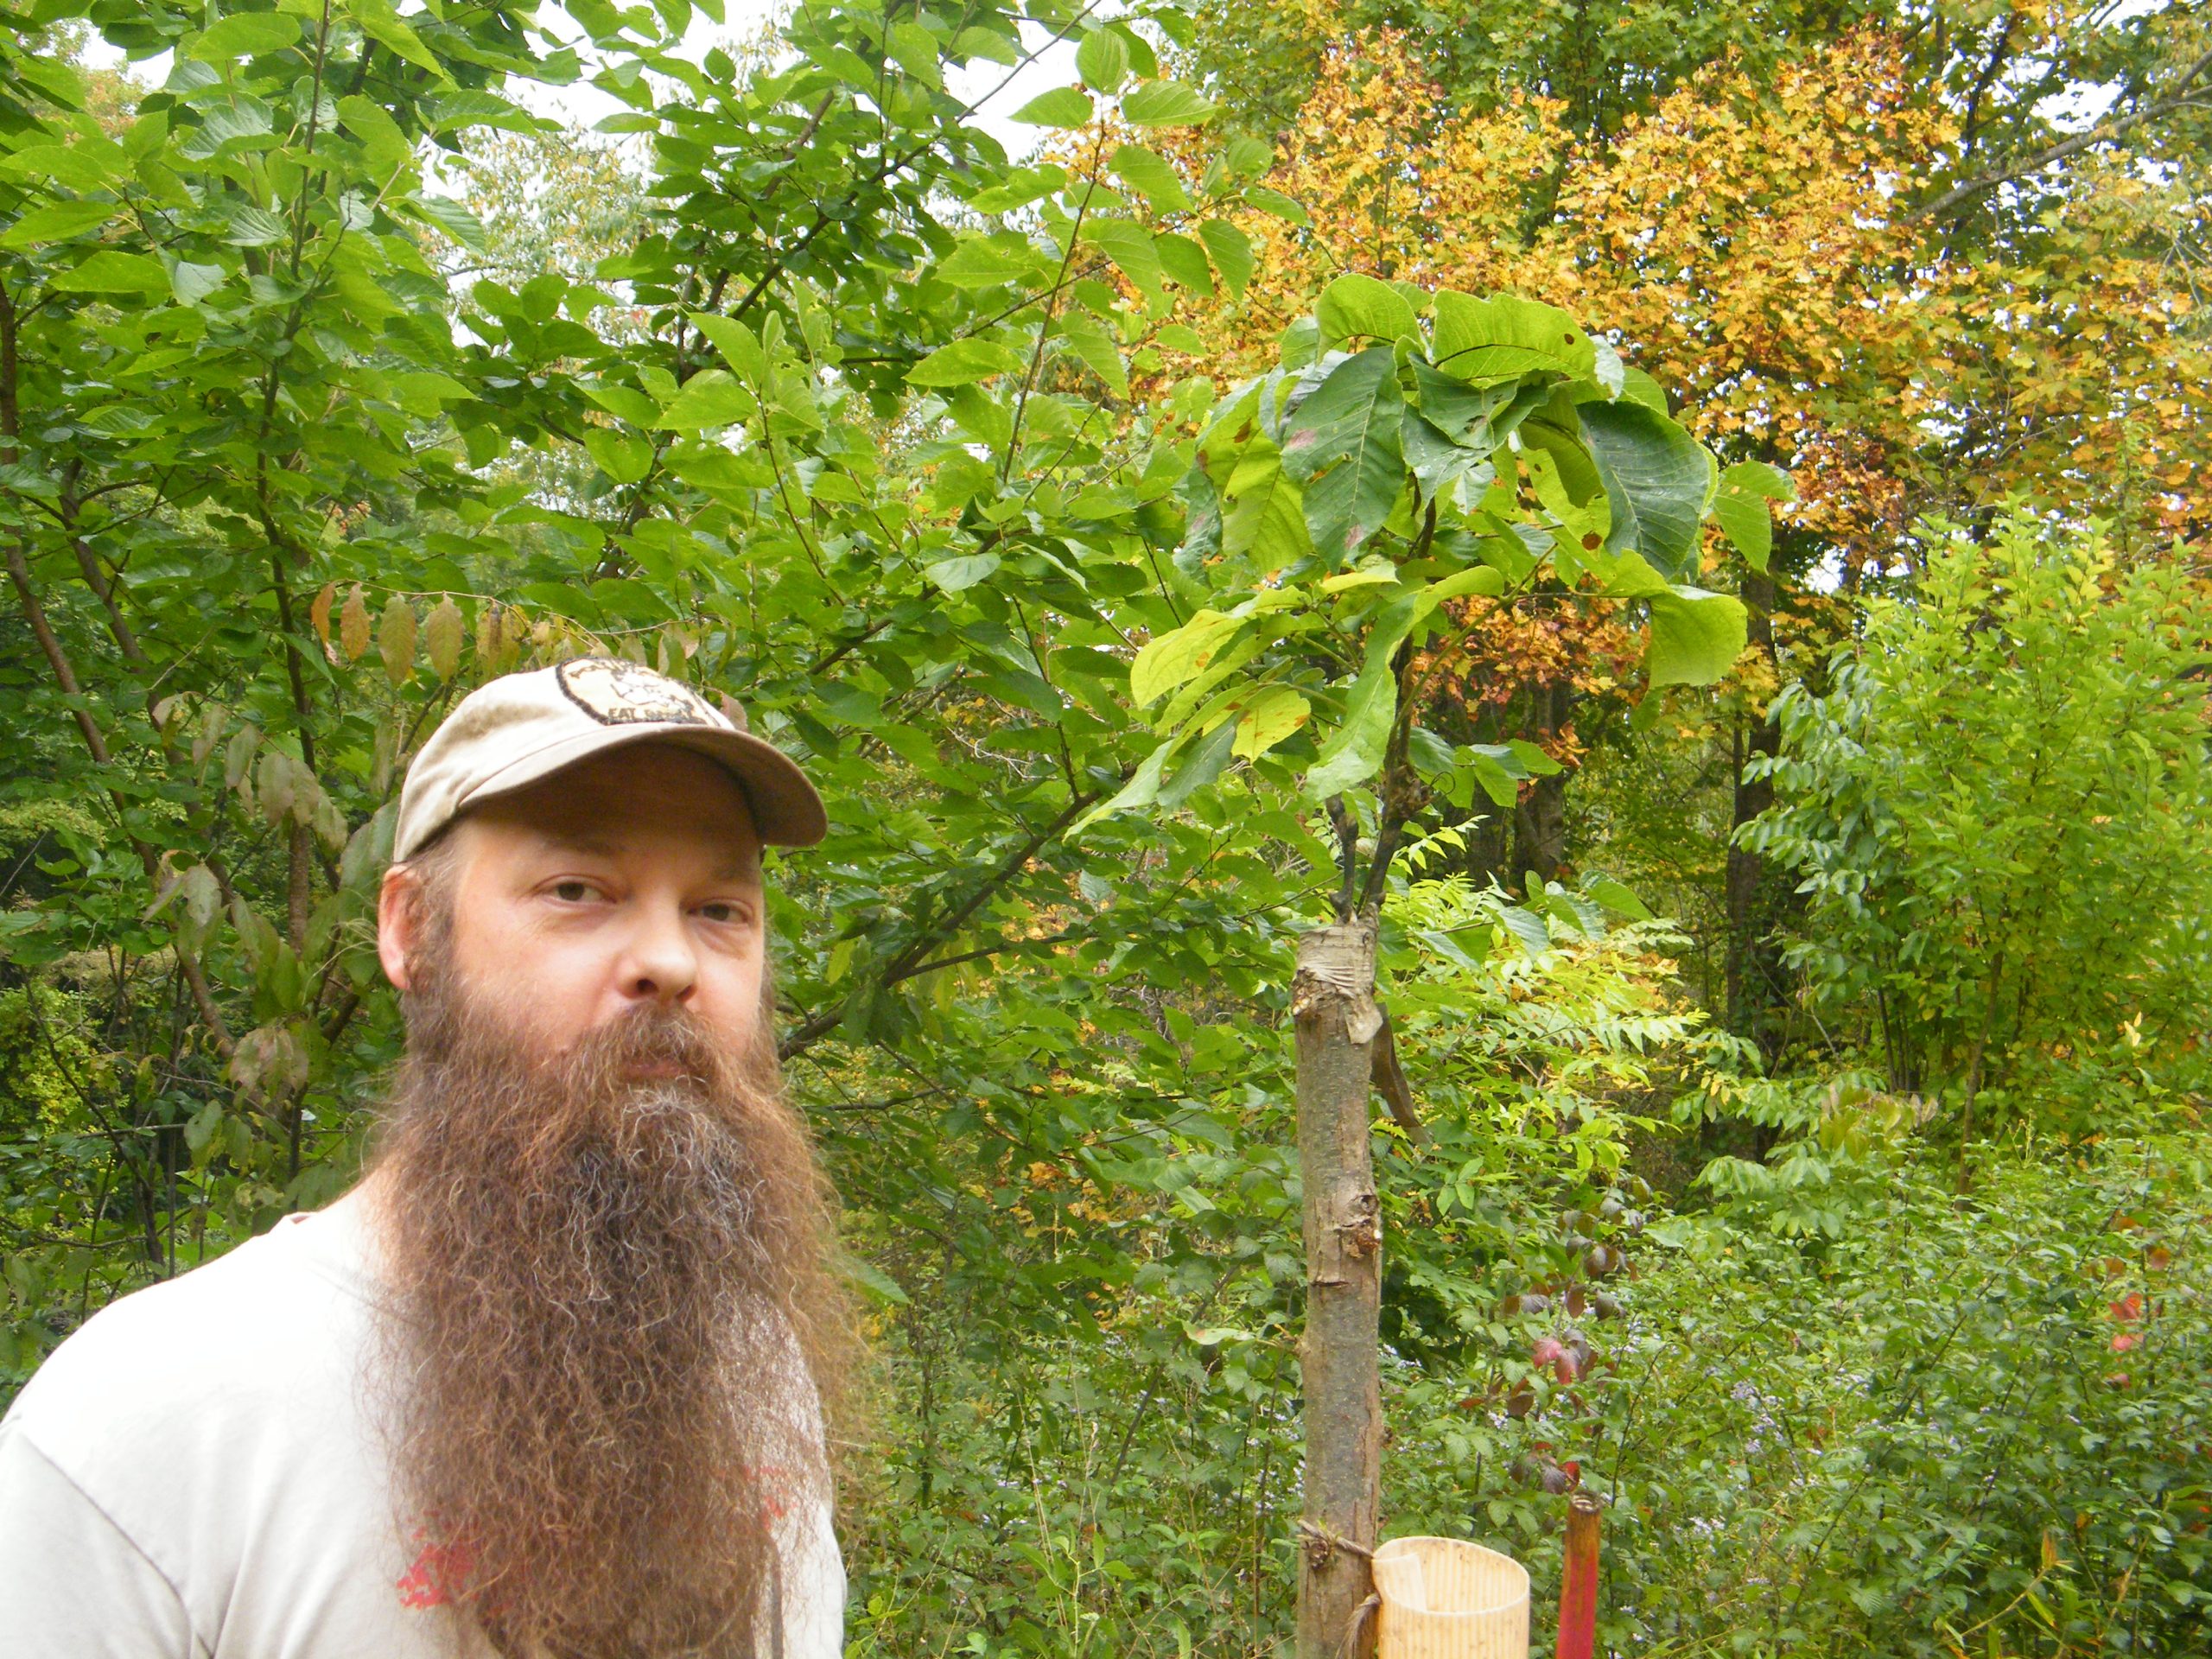 Man with beard and hat stands near a thin tree trunk with younger-looking branches and leaves sprouting from the top